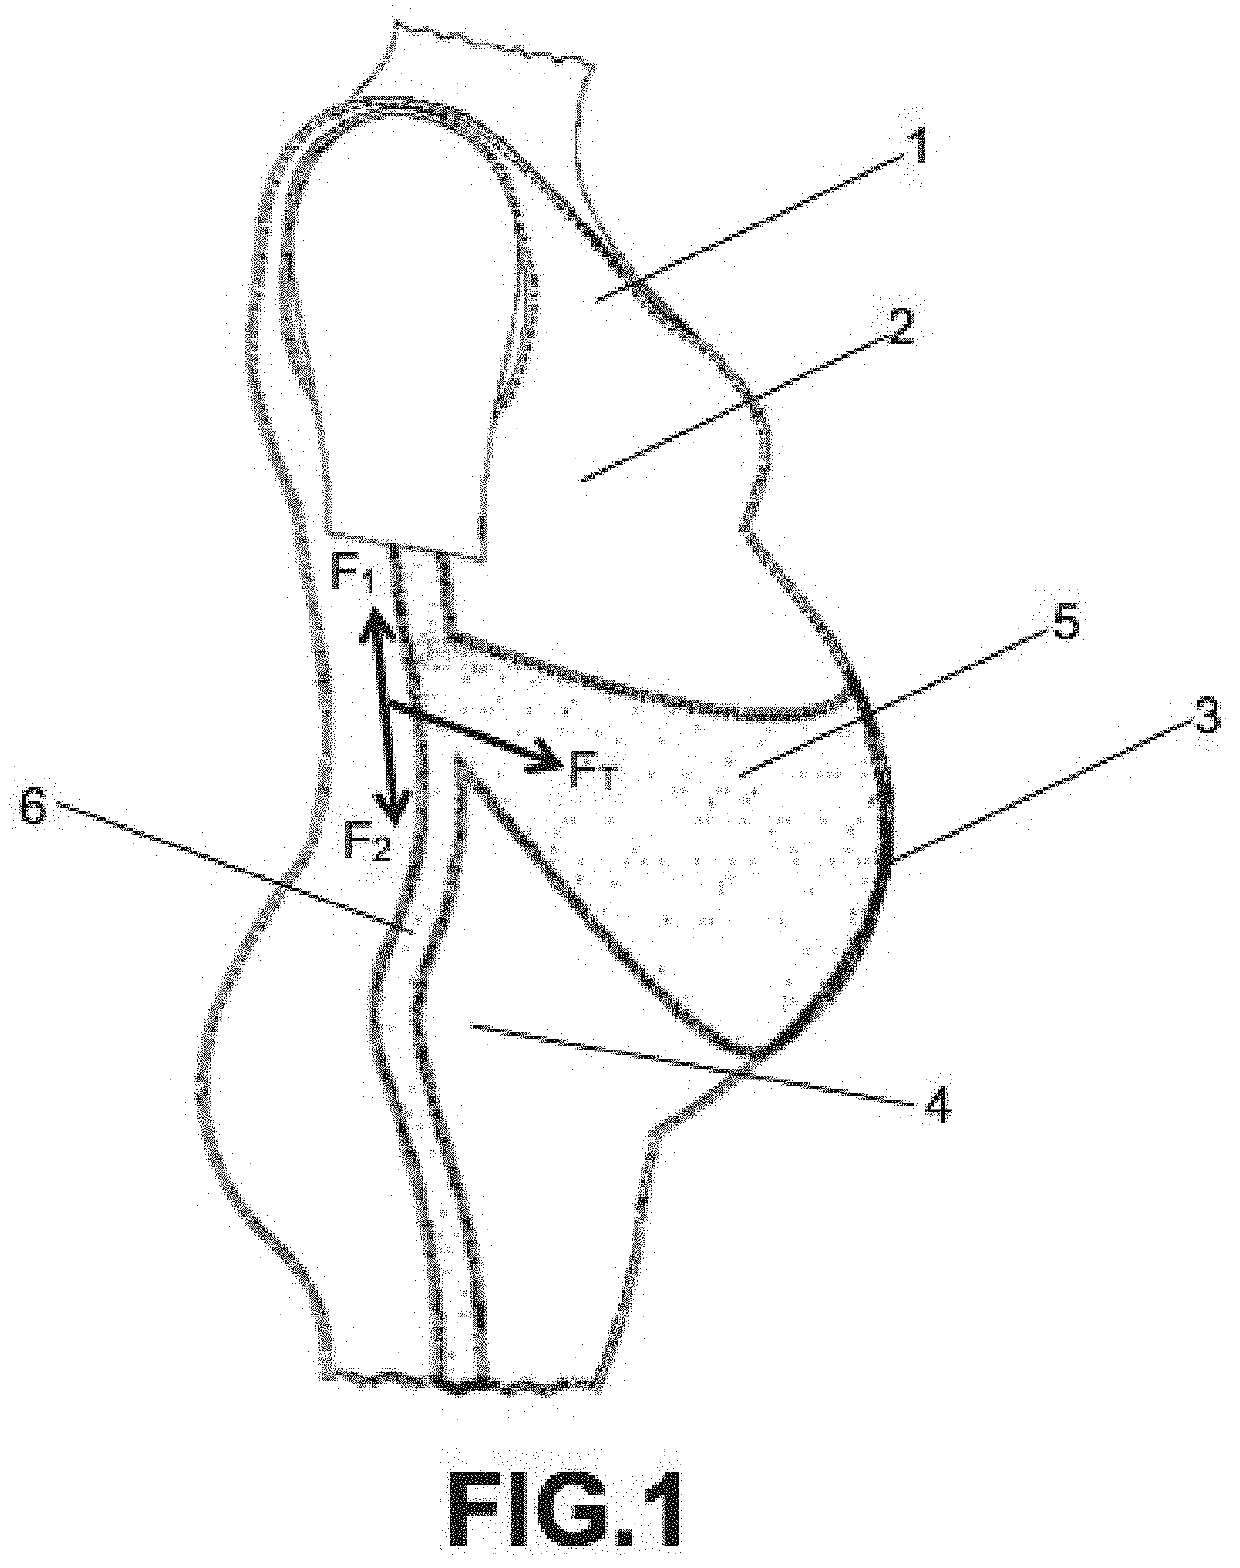 Feminine support device or garment for pregnant mothers' accommodation